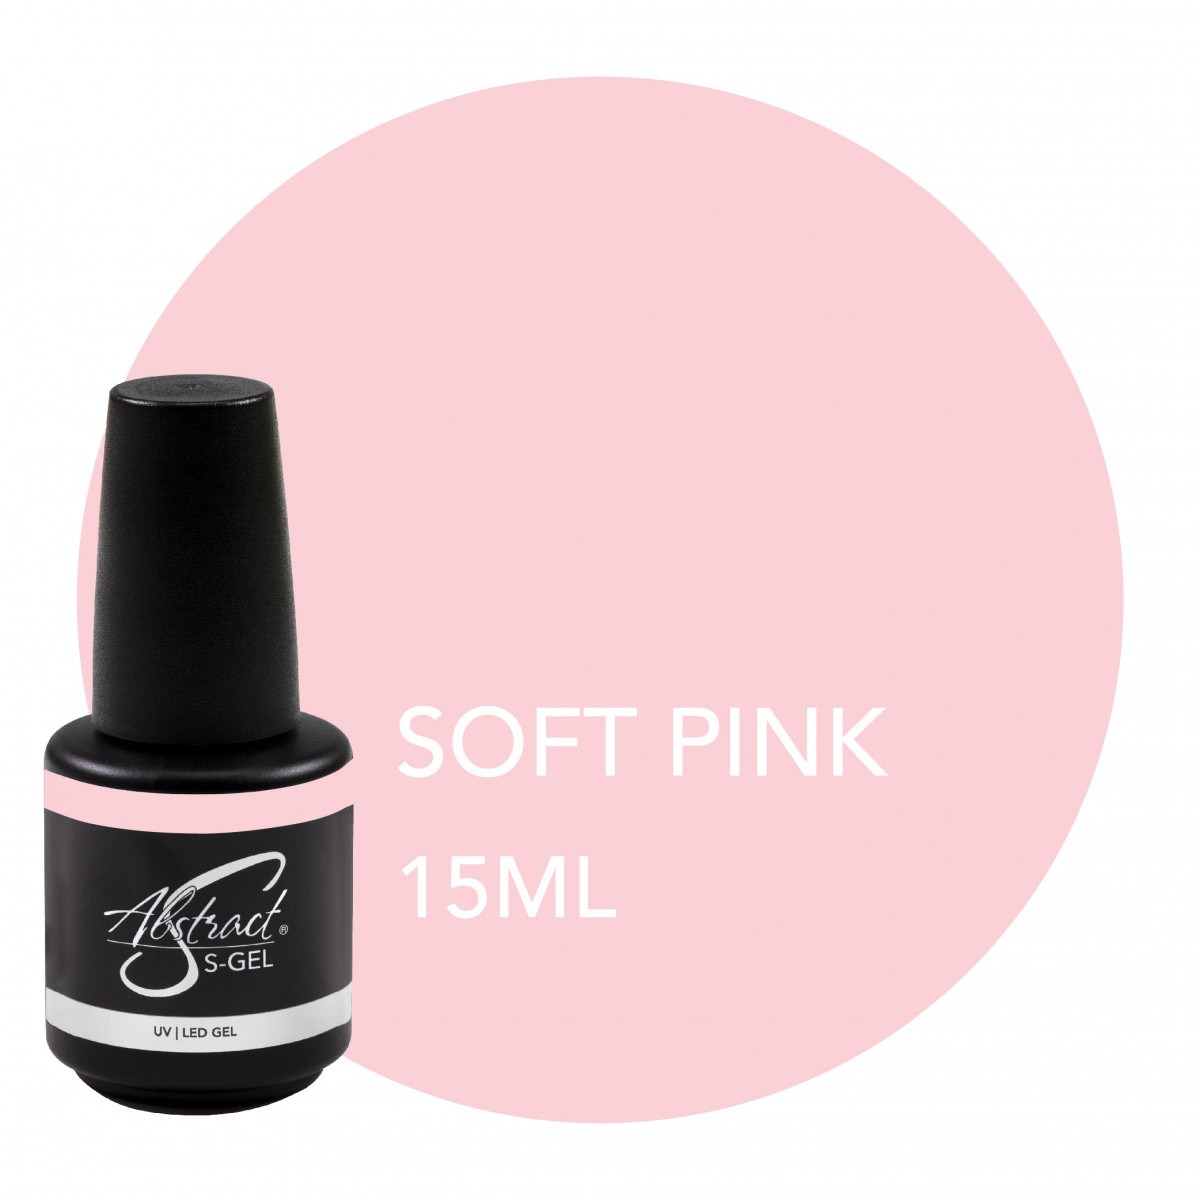 Abstract S-Gel Soft Pink